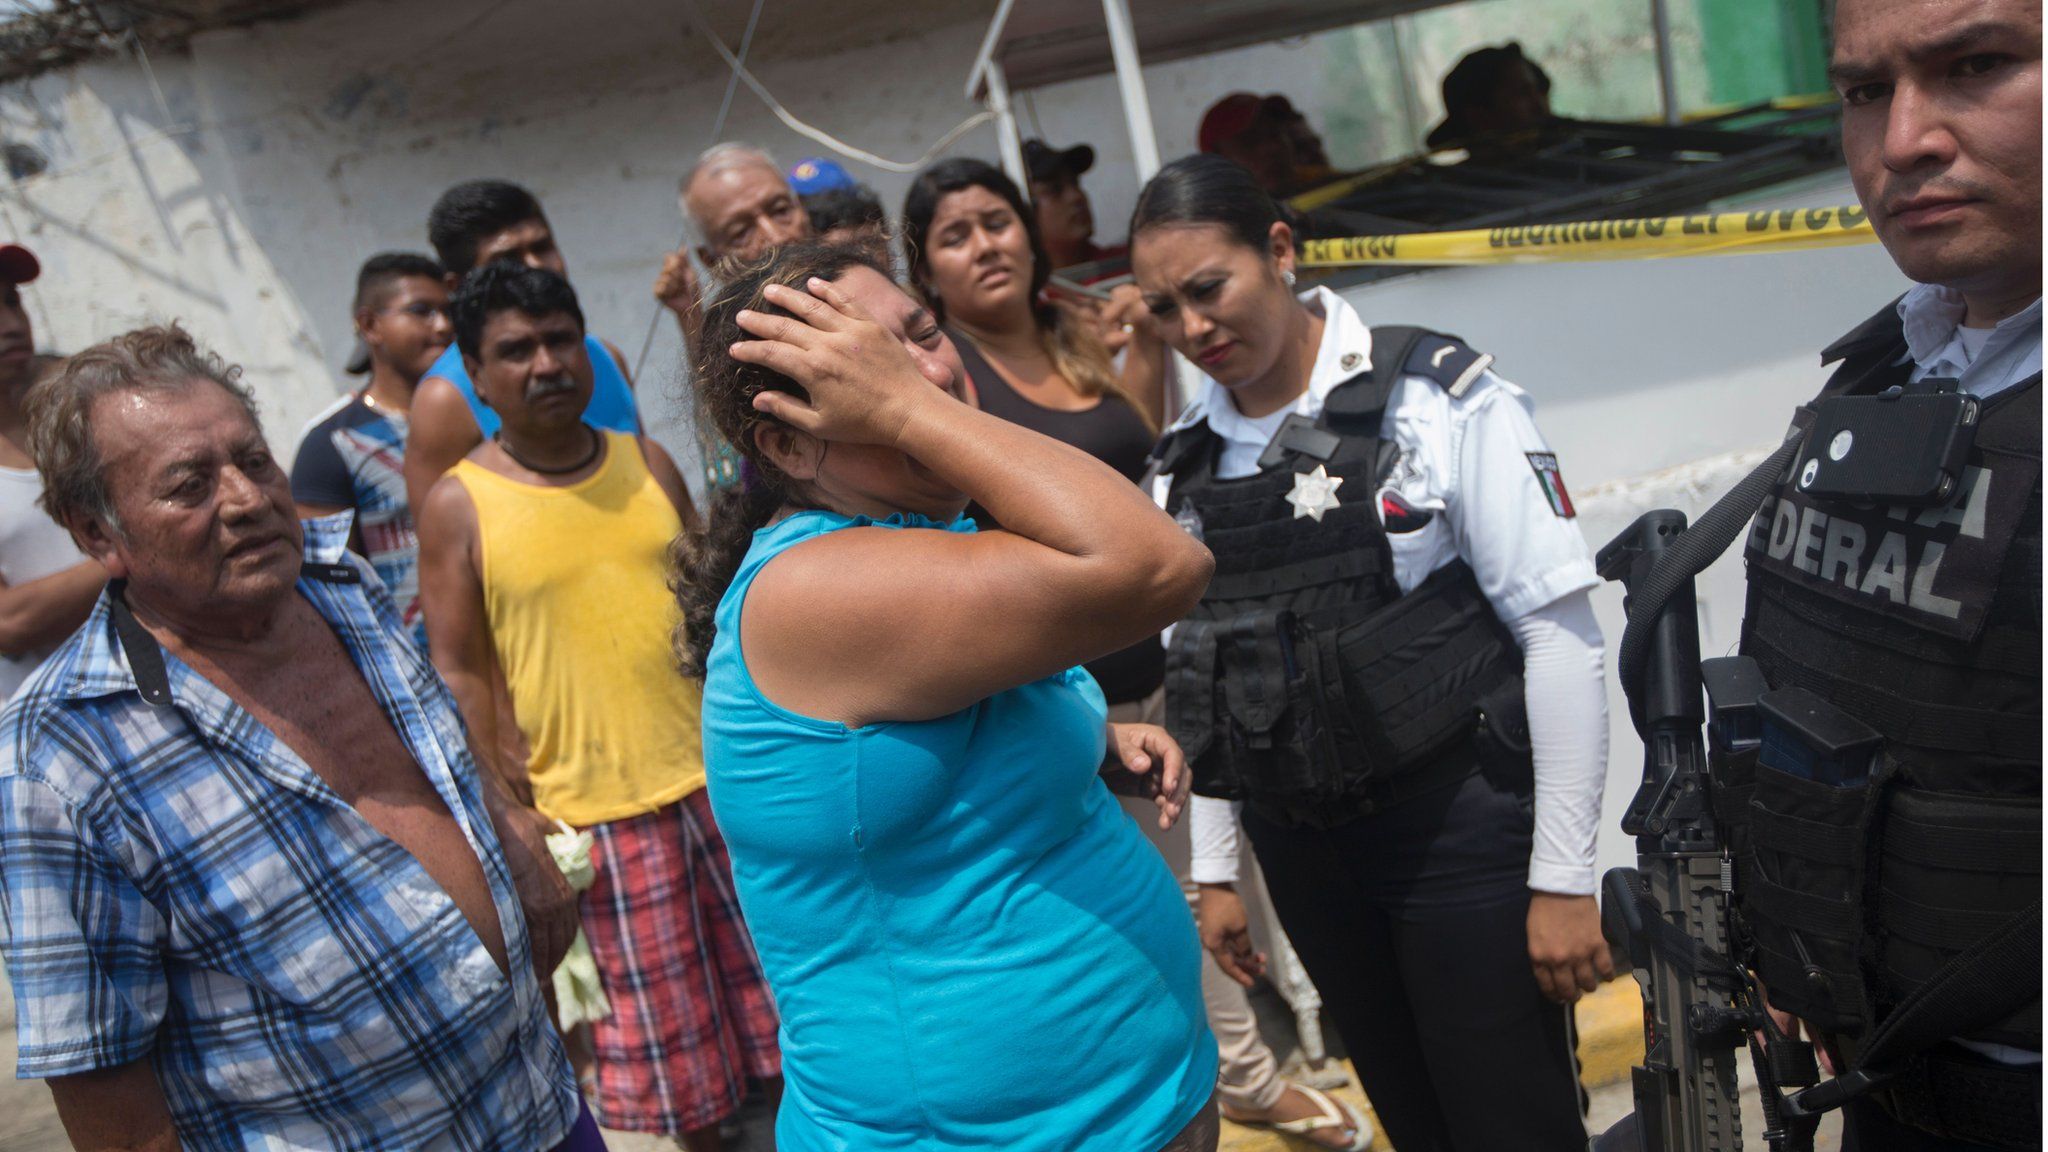 Relatives of five people murdered on a street cry in Acapulco's Icacos neighborhood, Guerrero State, Mexico, on April 17, 2016.